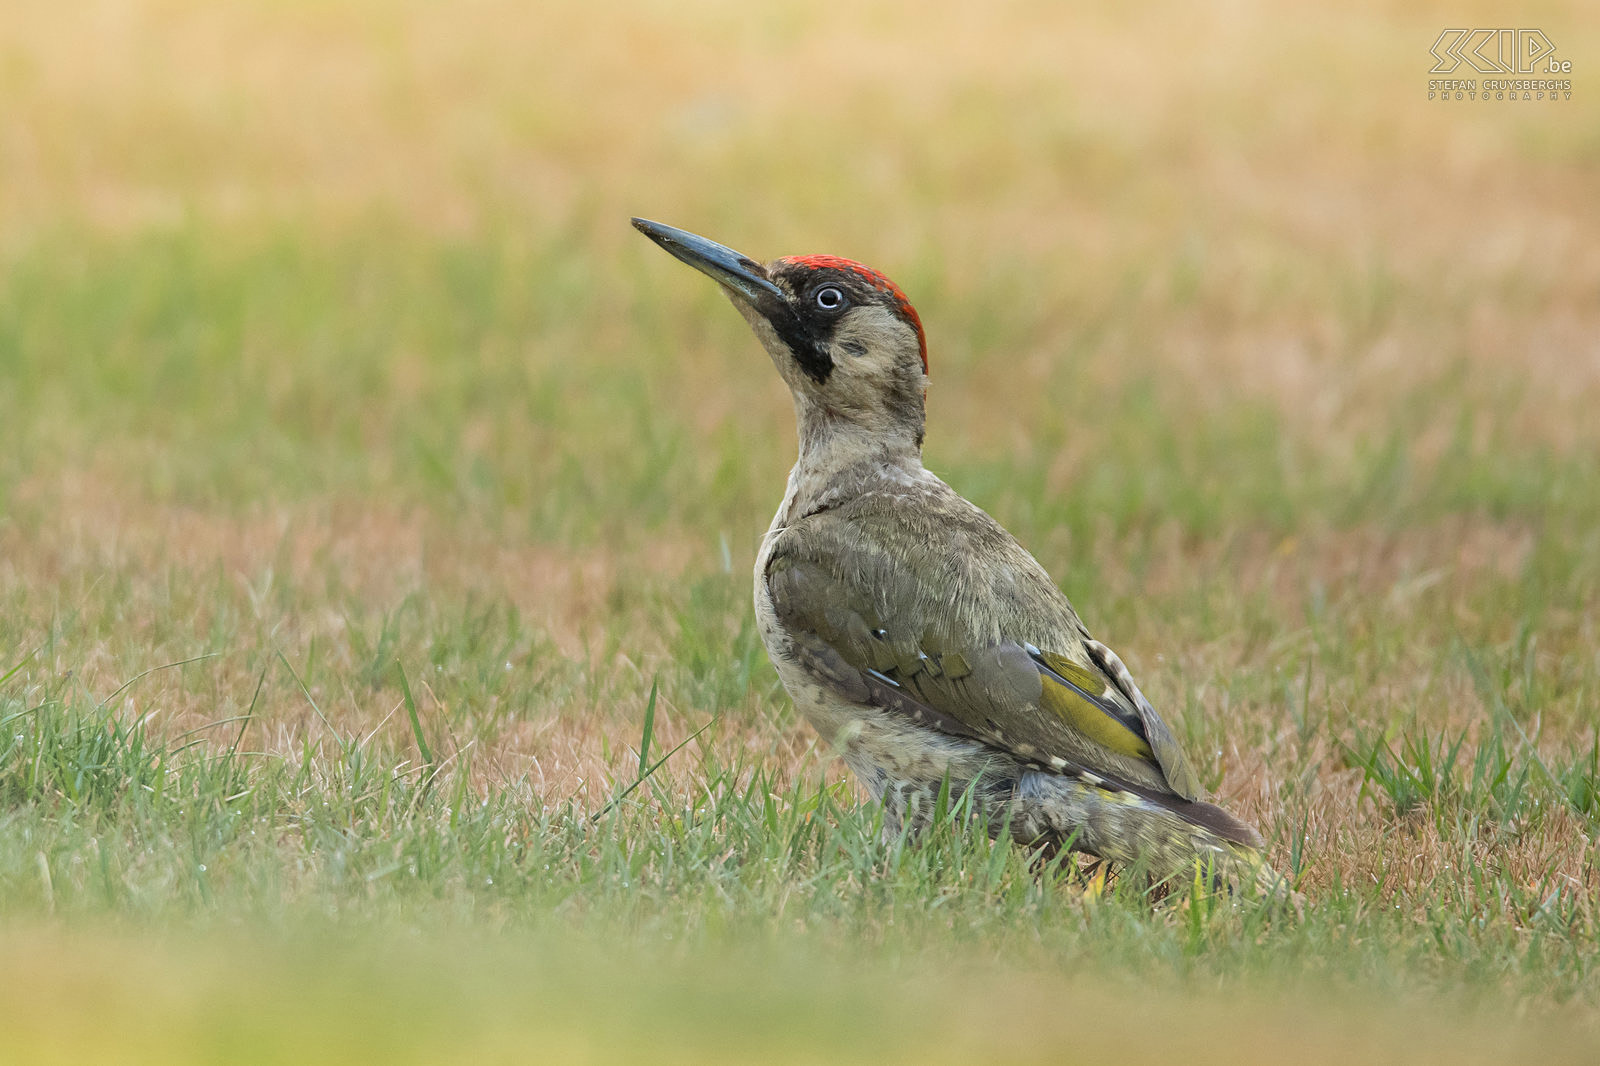 Green woodpecker This summer some green woodpeckers (Picus viridis) visited our garden in Scherpenheuvel almost every day. Green woodpeckers almost exclusively search for food on the ground and our lawn was the ideal place to find ants. Stefan Cruysberghs